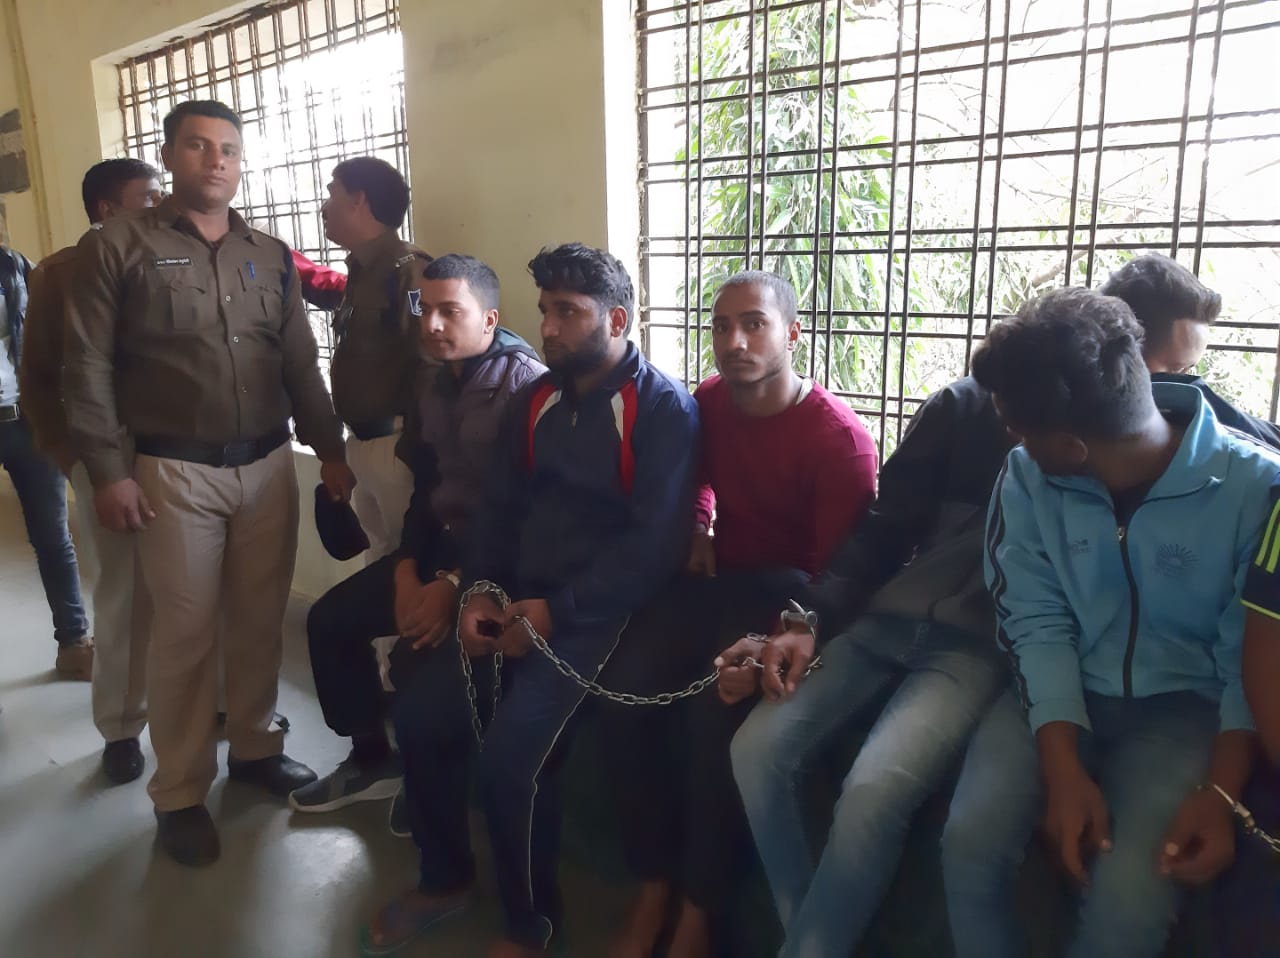 GRP presented the accused in court